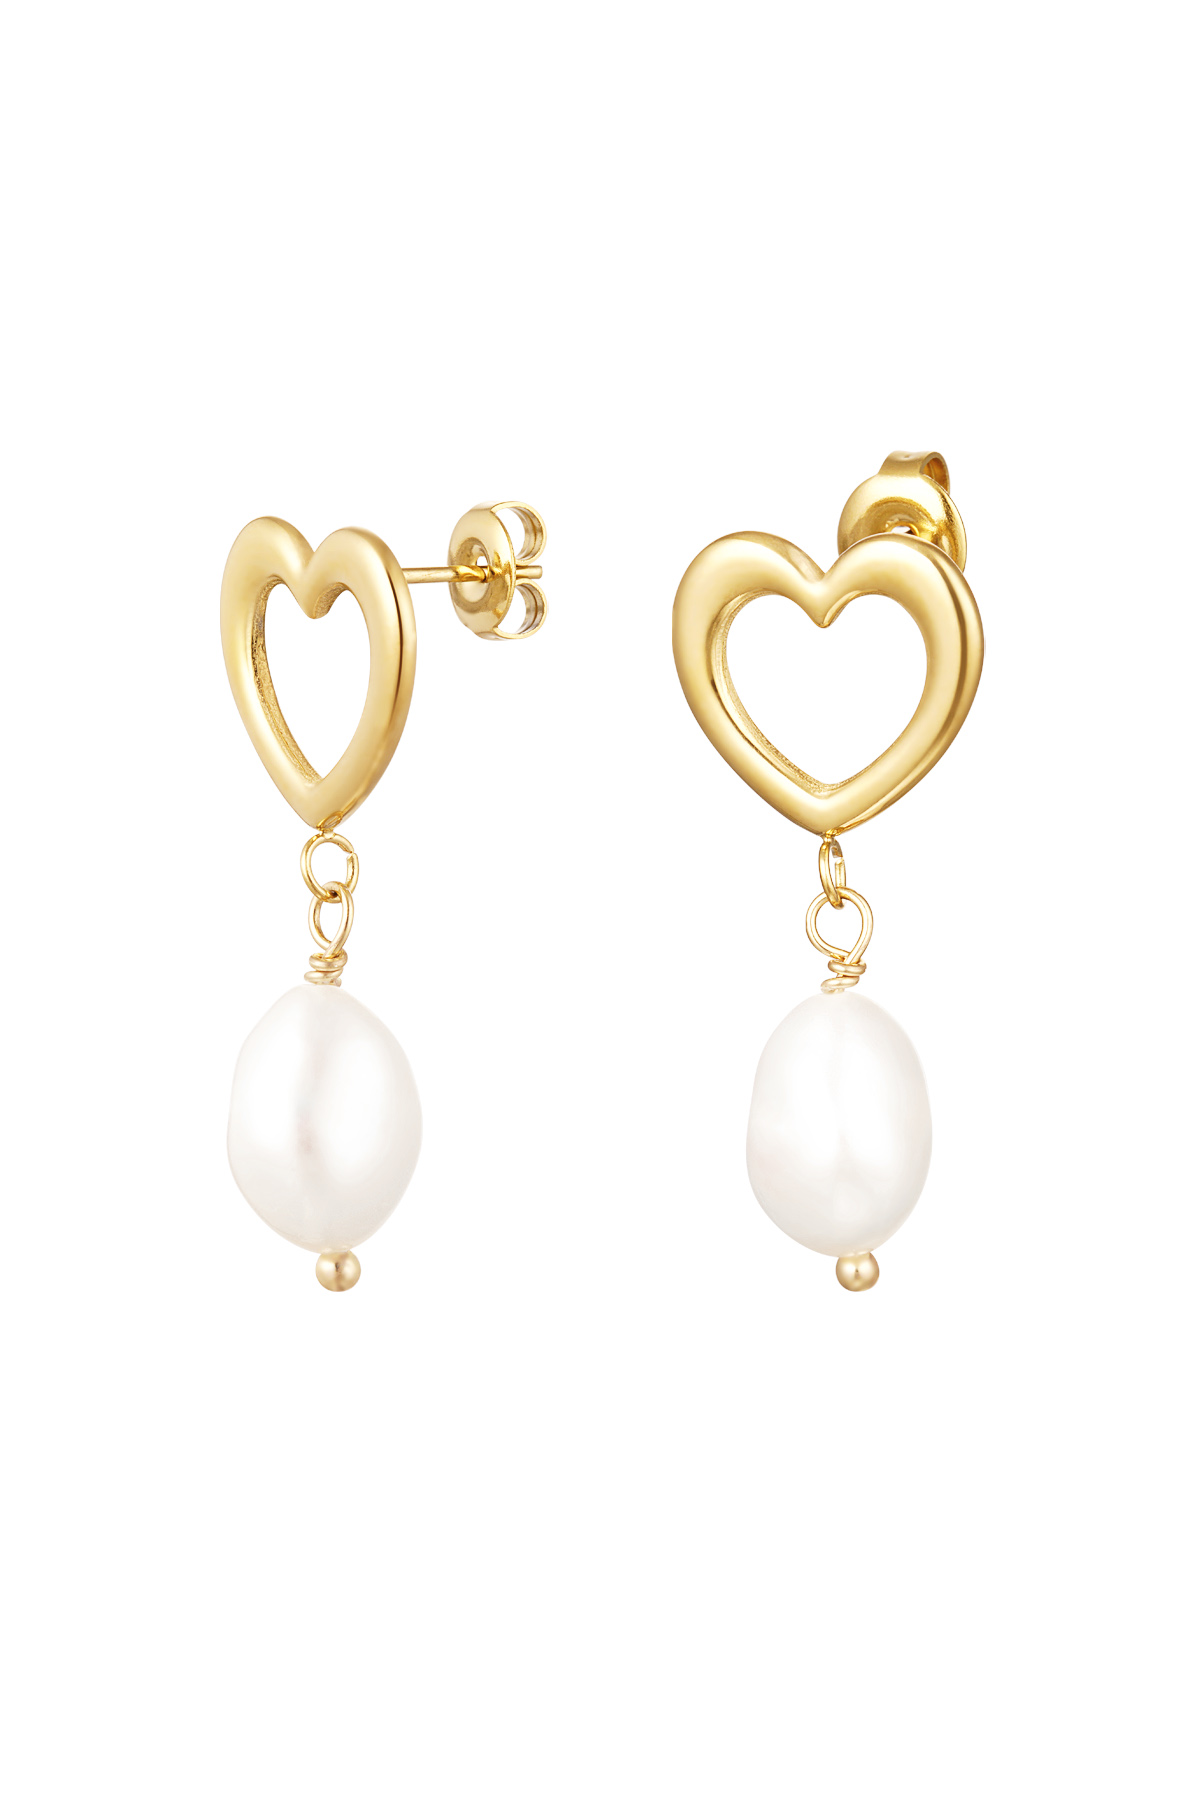 Earring heart with pearl detail - gold stainless steel 